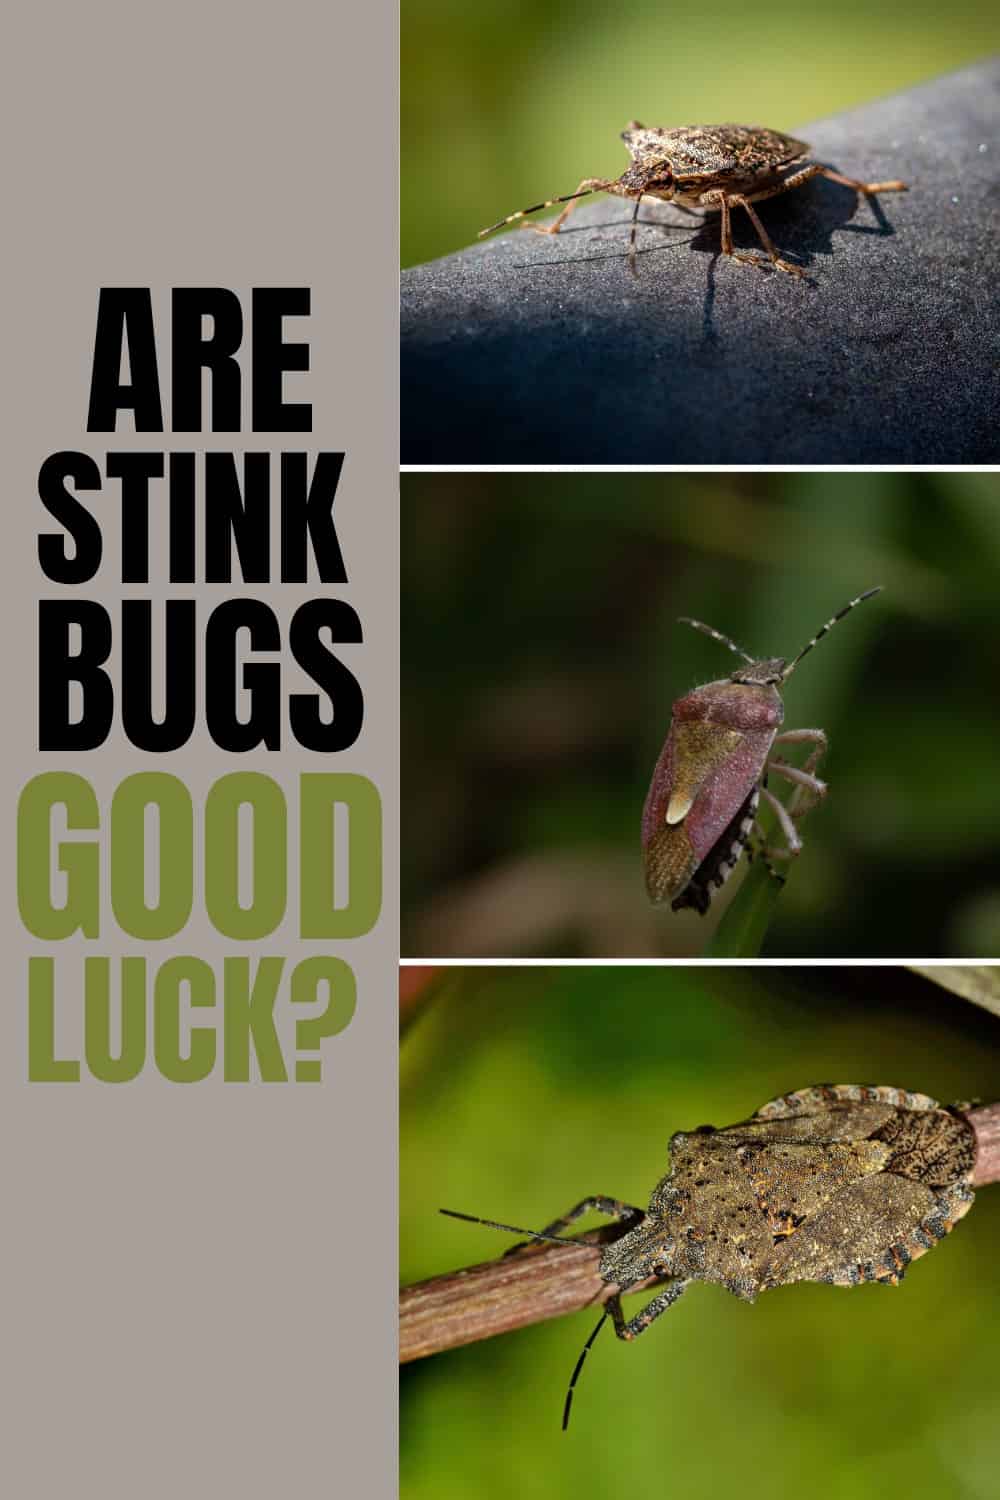 Do Stink Bugs Bring Good Luck To Your Home?